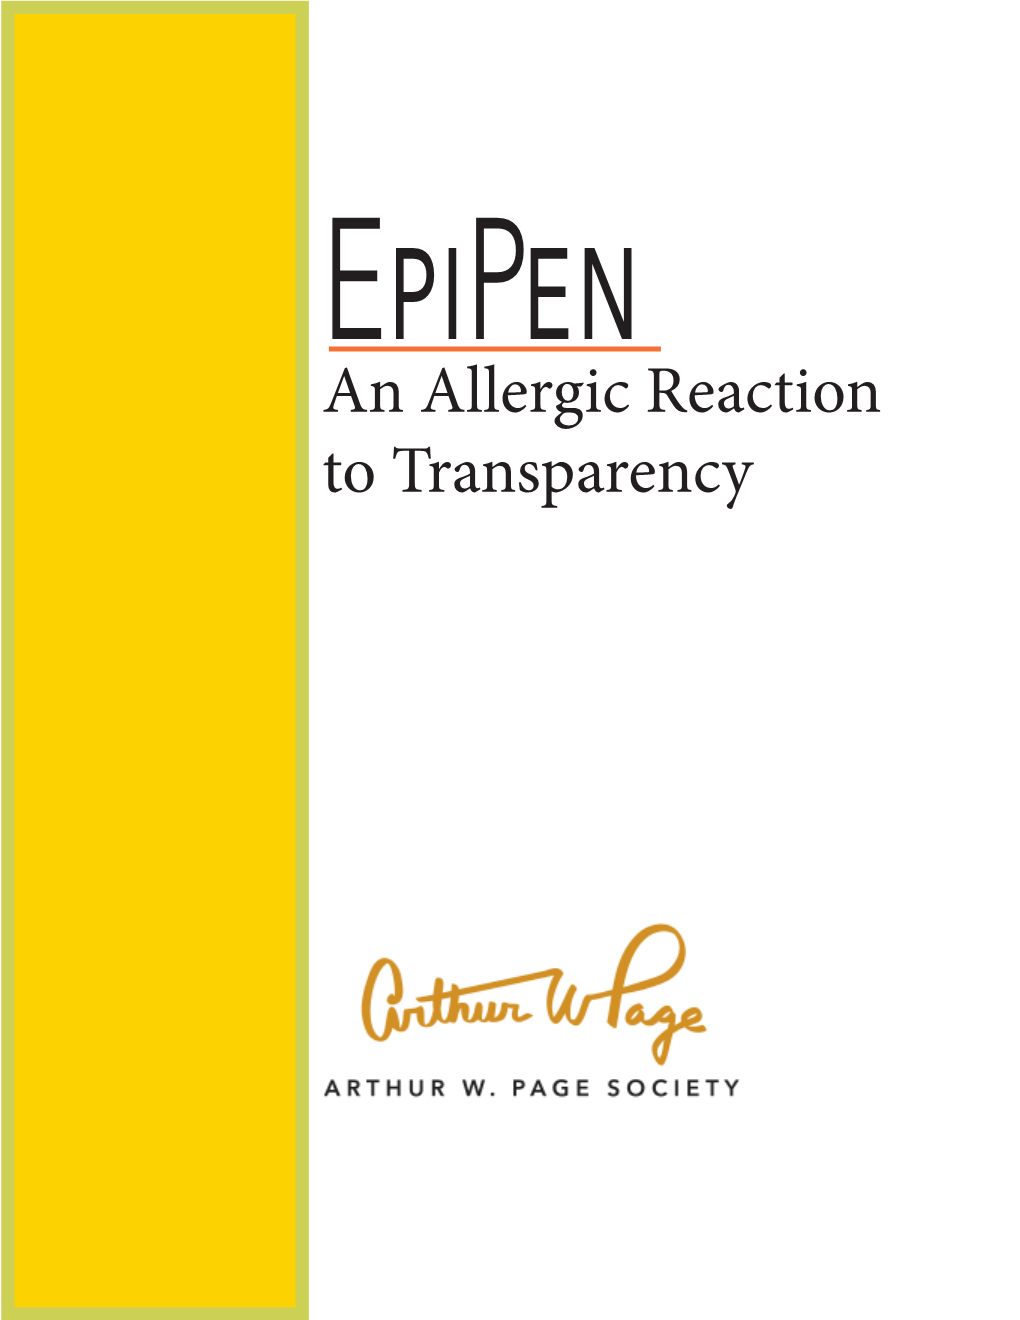 An Allergic Reaction to Transparency